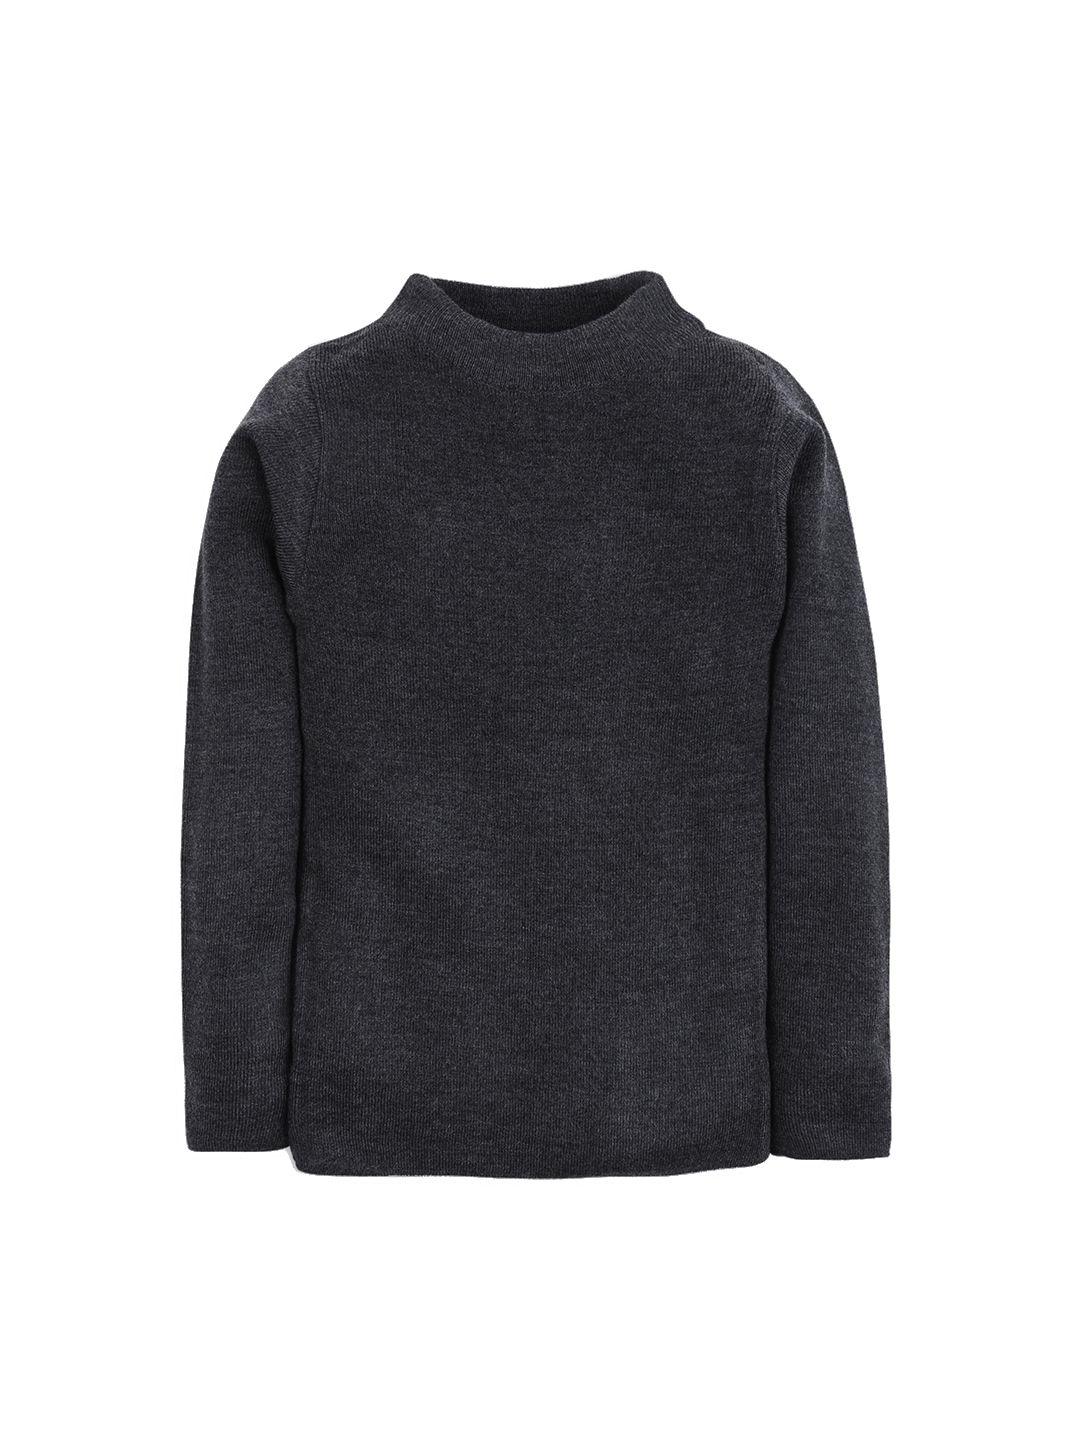 rvk-unisex-charcoal-grey-solid-sweater